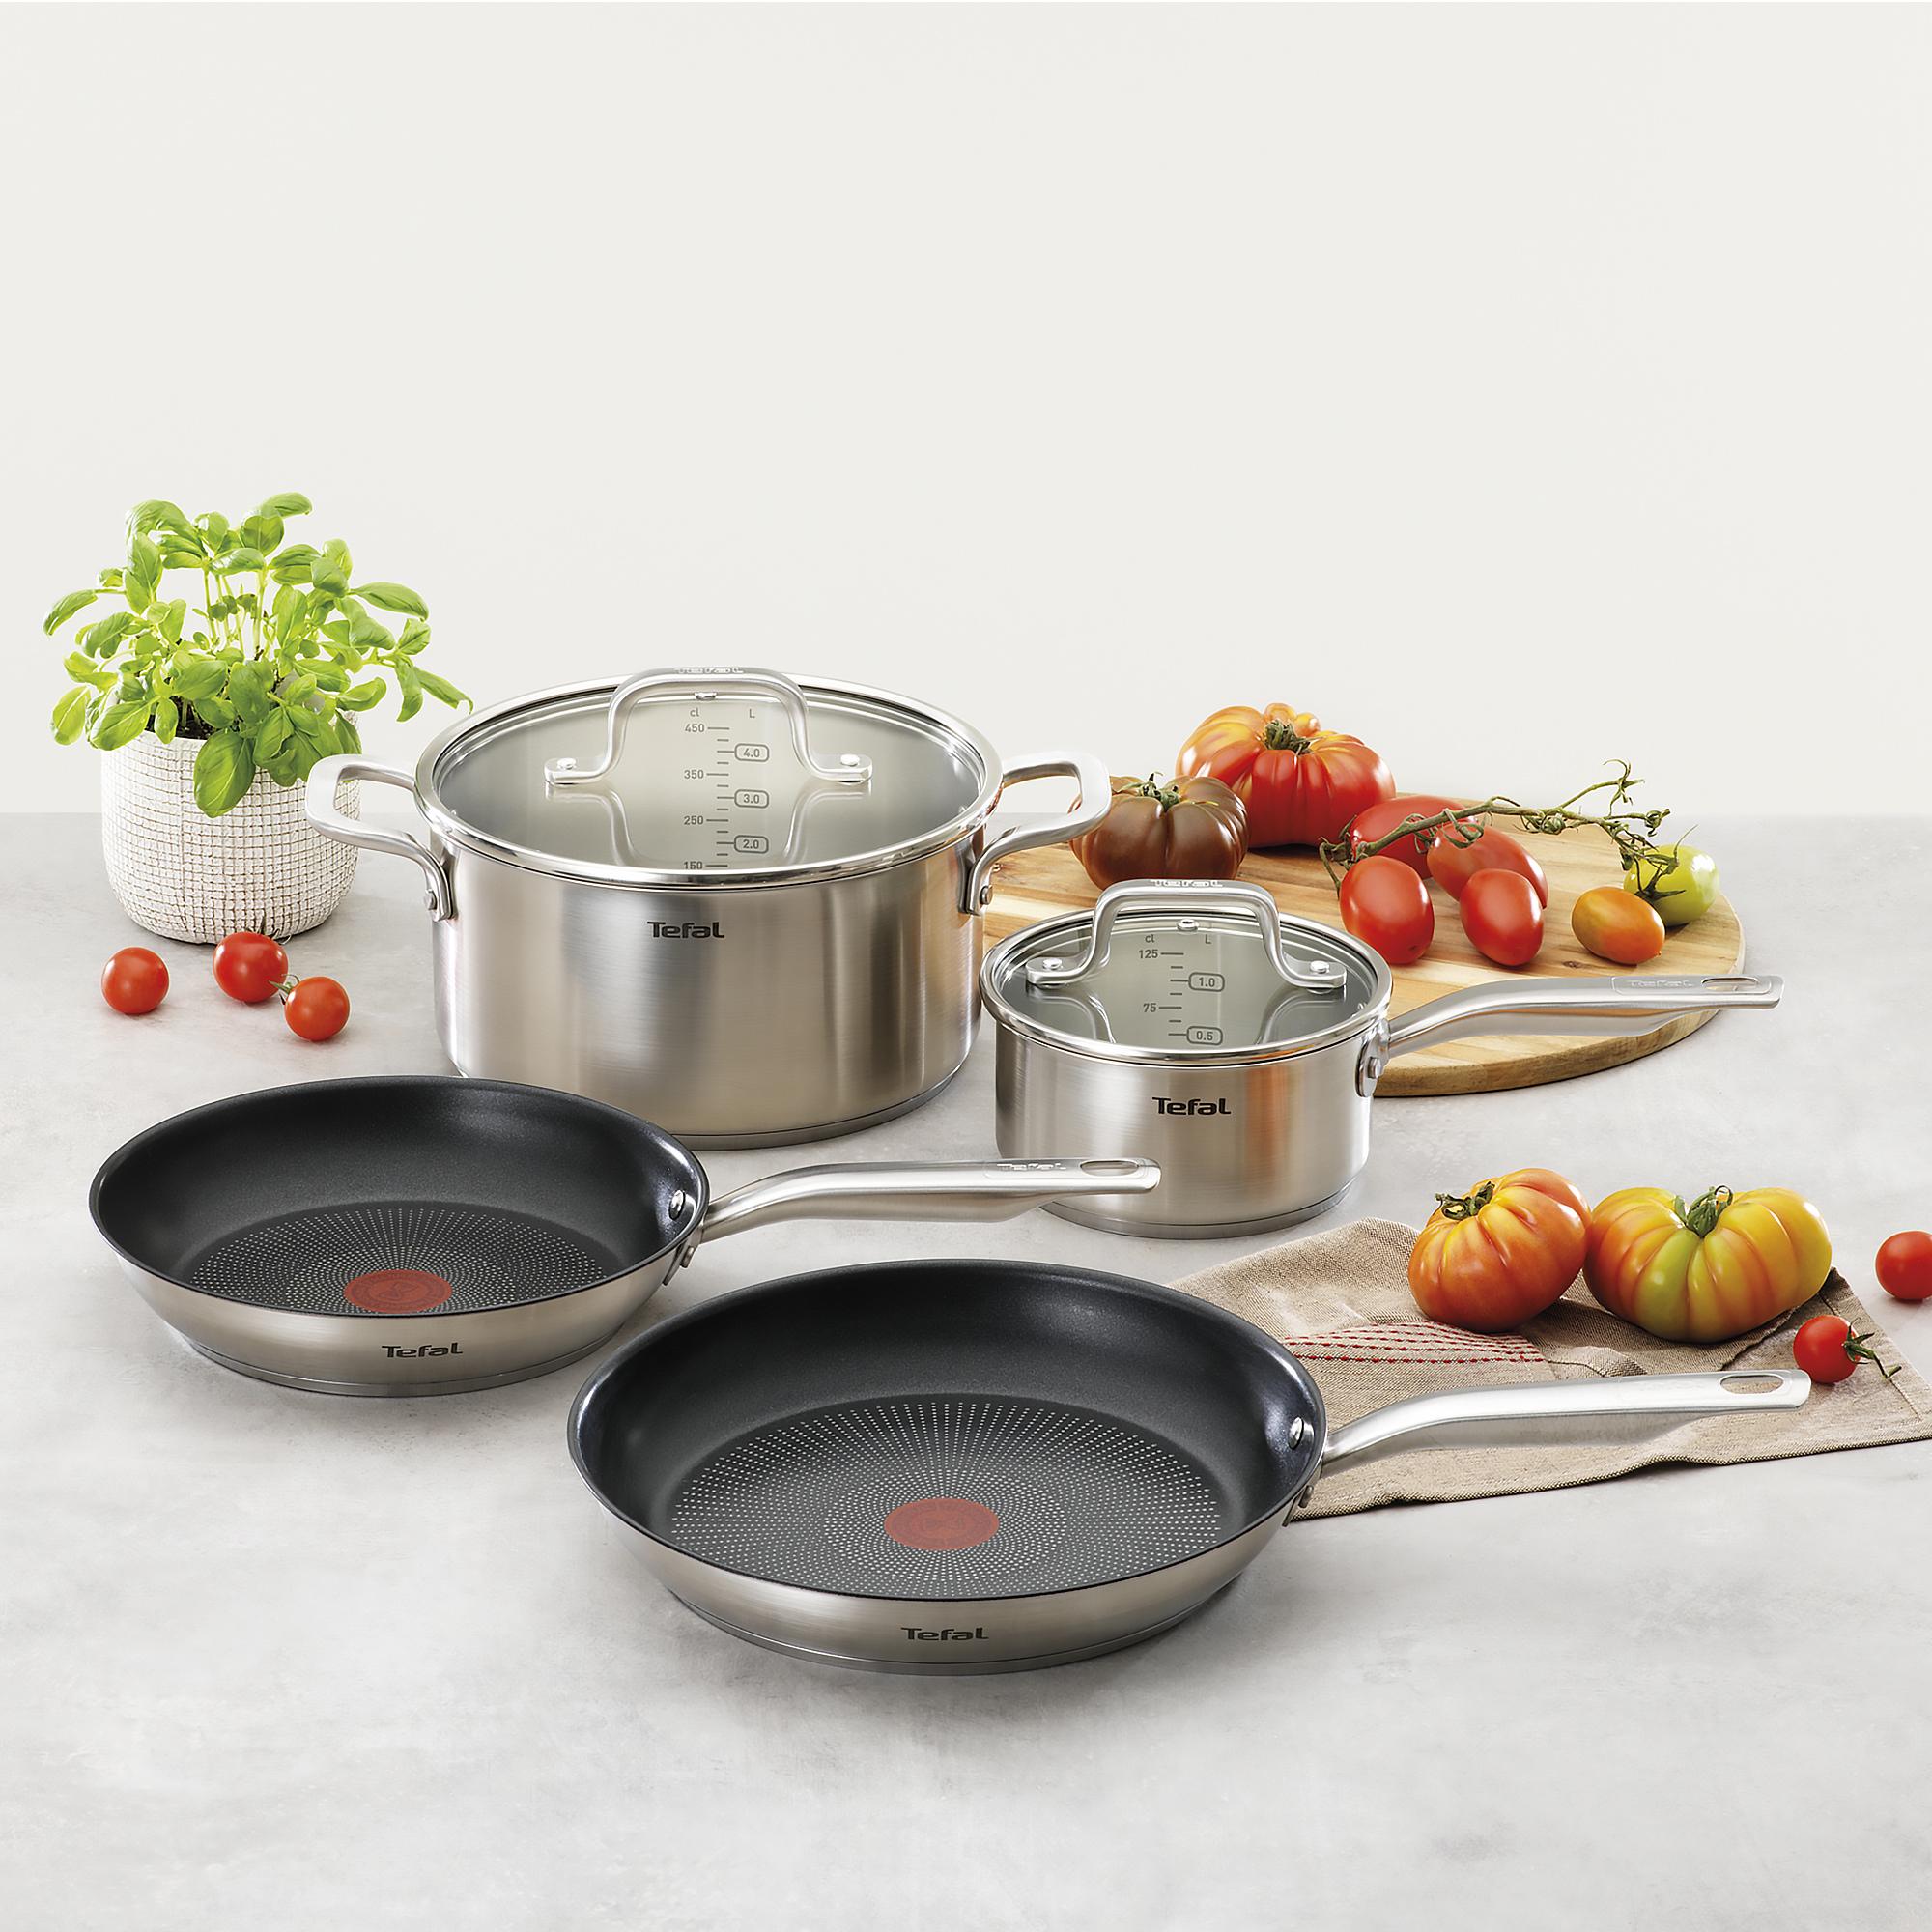 Tefal Virtuoso 4pc Stainless Steel Cookware Set Image 6